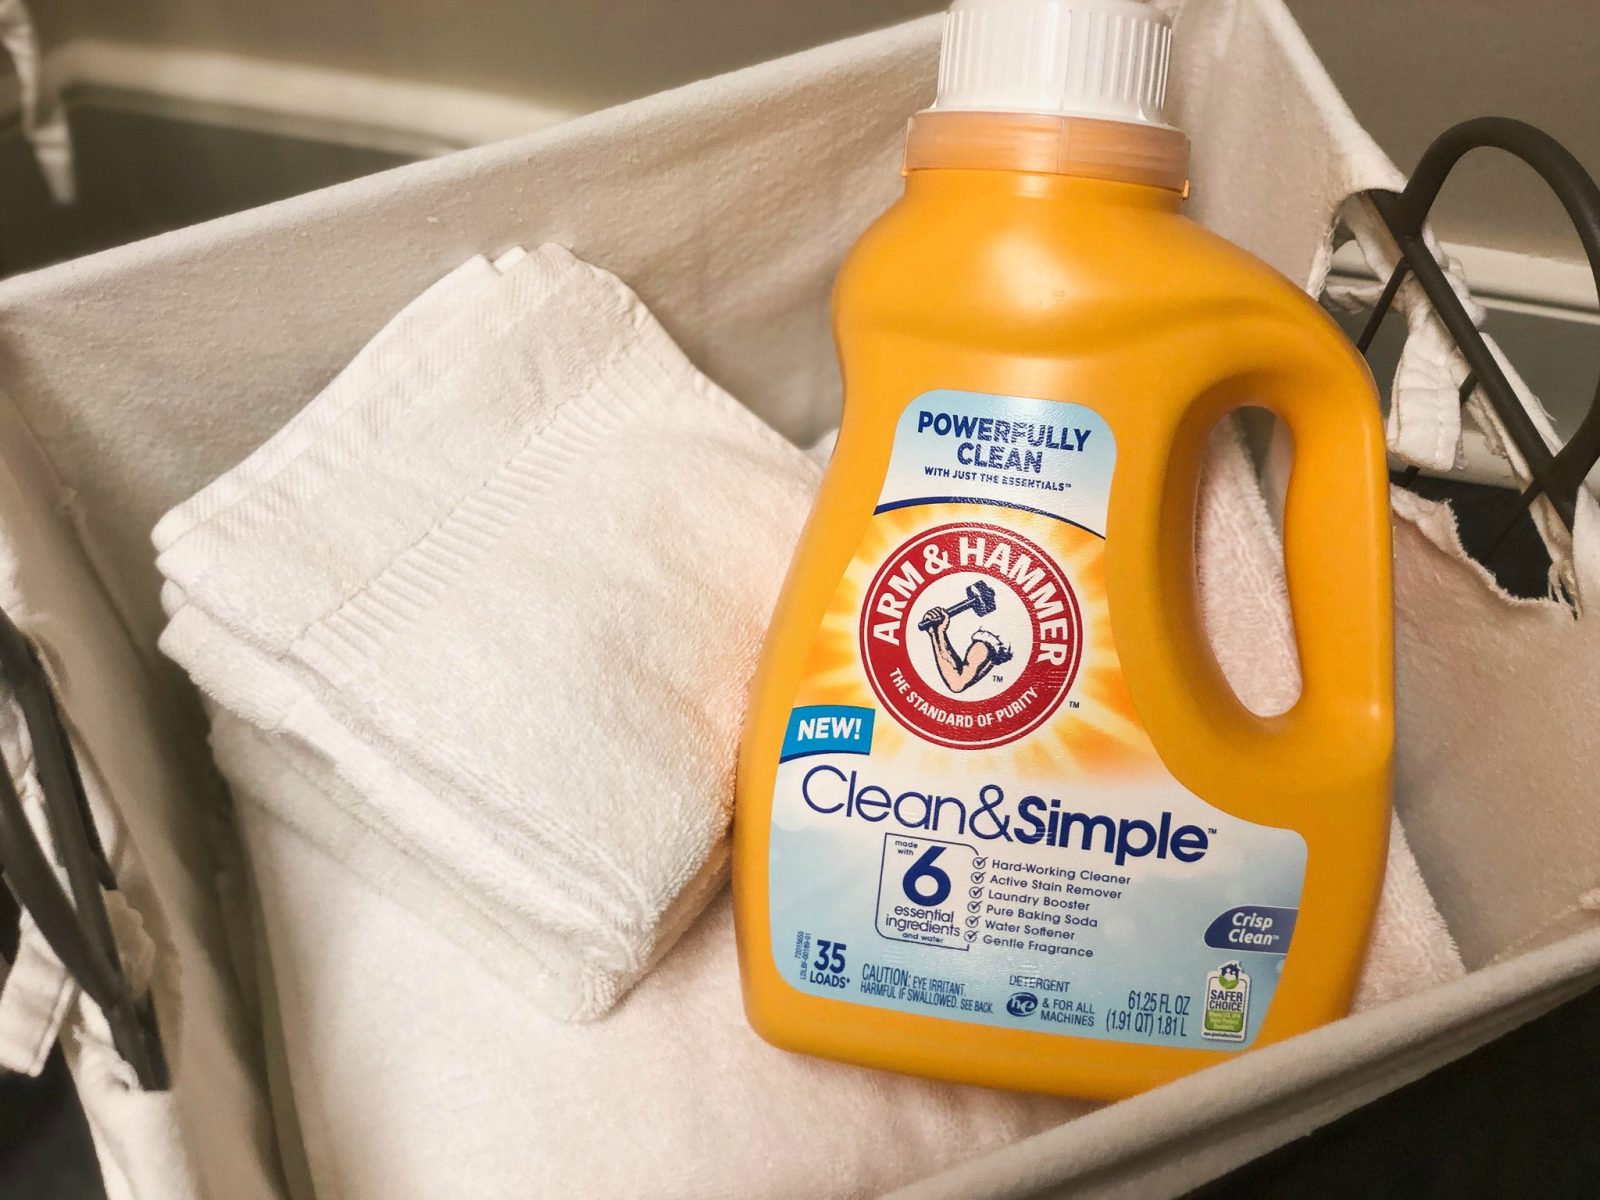 Look For ARM & HAMMER™ Clean & Simple™ Products At Publix  – Powerful Clean. Smart Low Price!